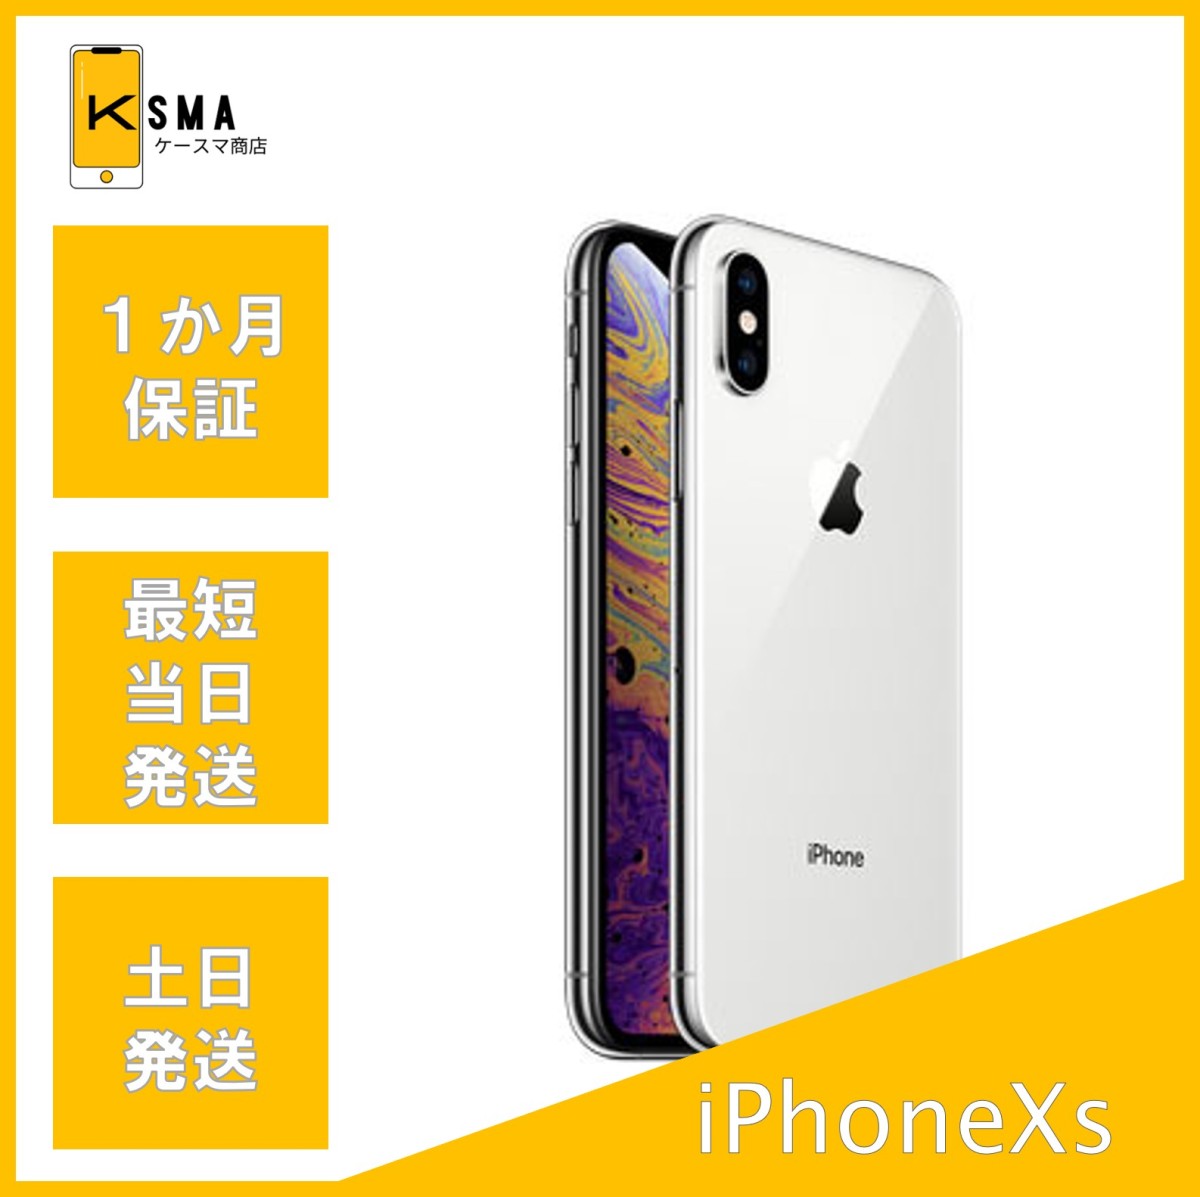  with translation special price iPhone XS 256GB silver SIM free B rank 